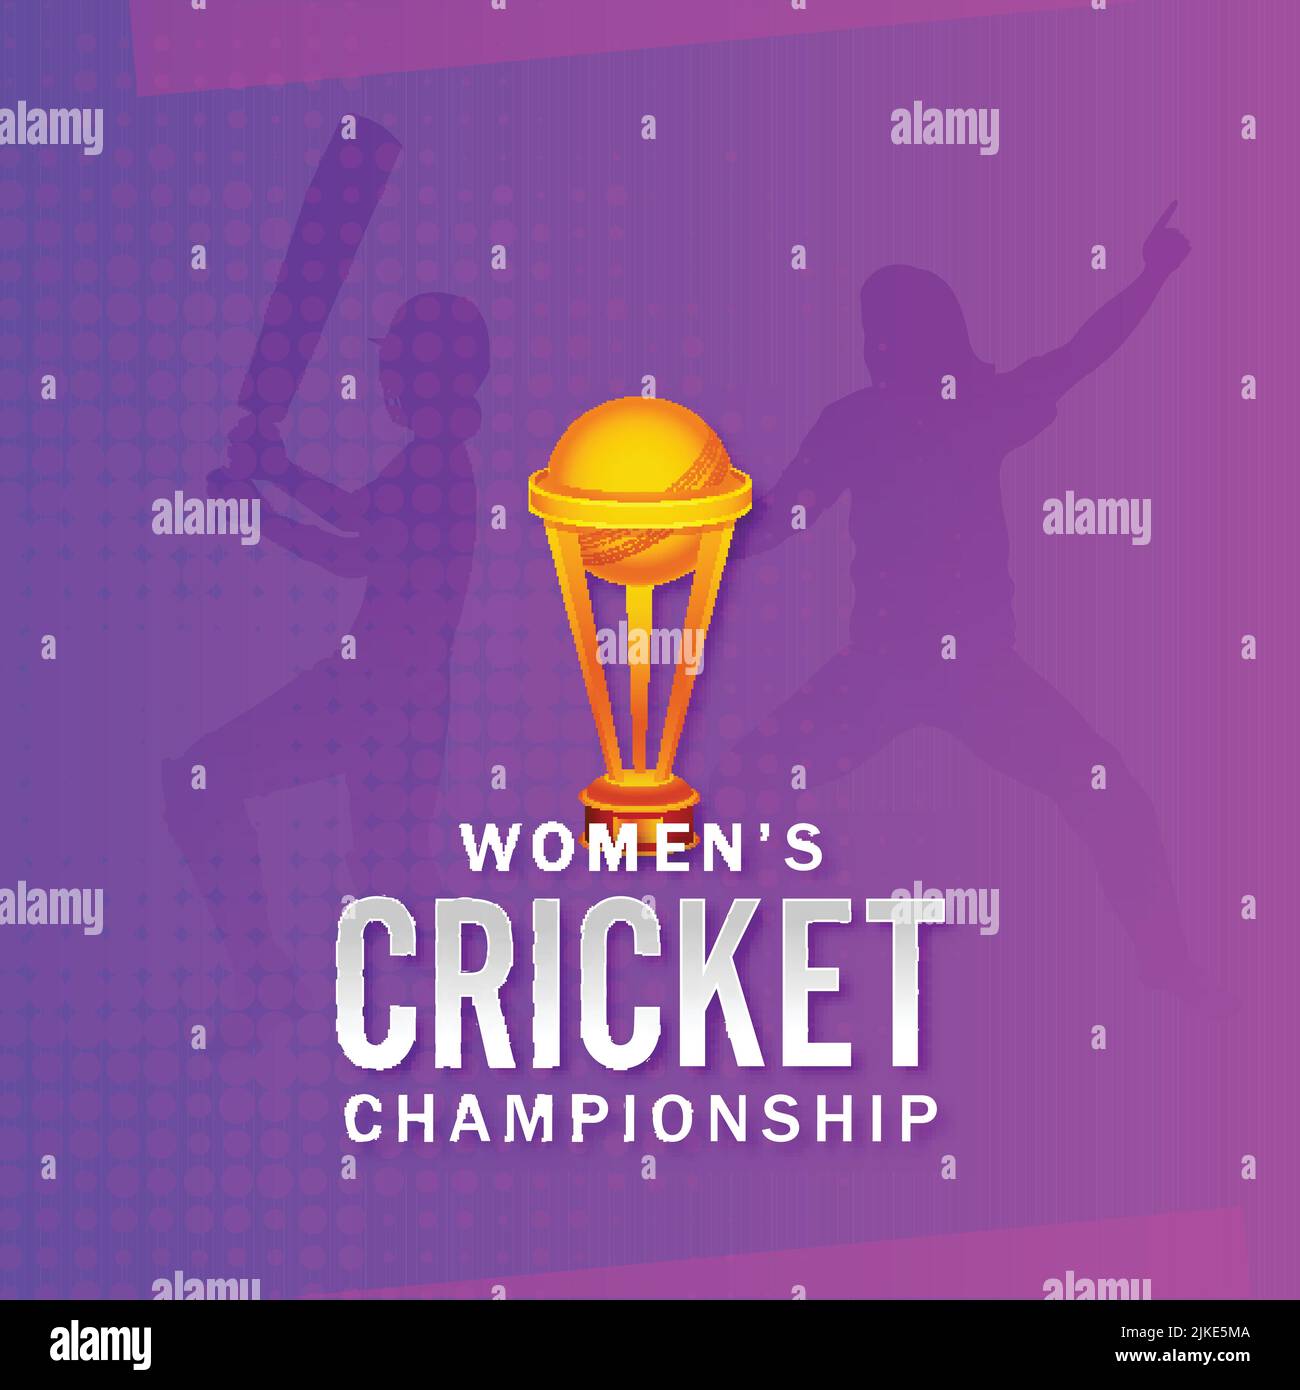 Women's Cricket Championship Font With 3D Winning Trophy Cup And Silhouette Female Cricketer Players On Purple Halftone Background. Stock Vector